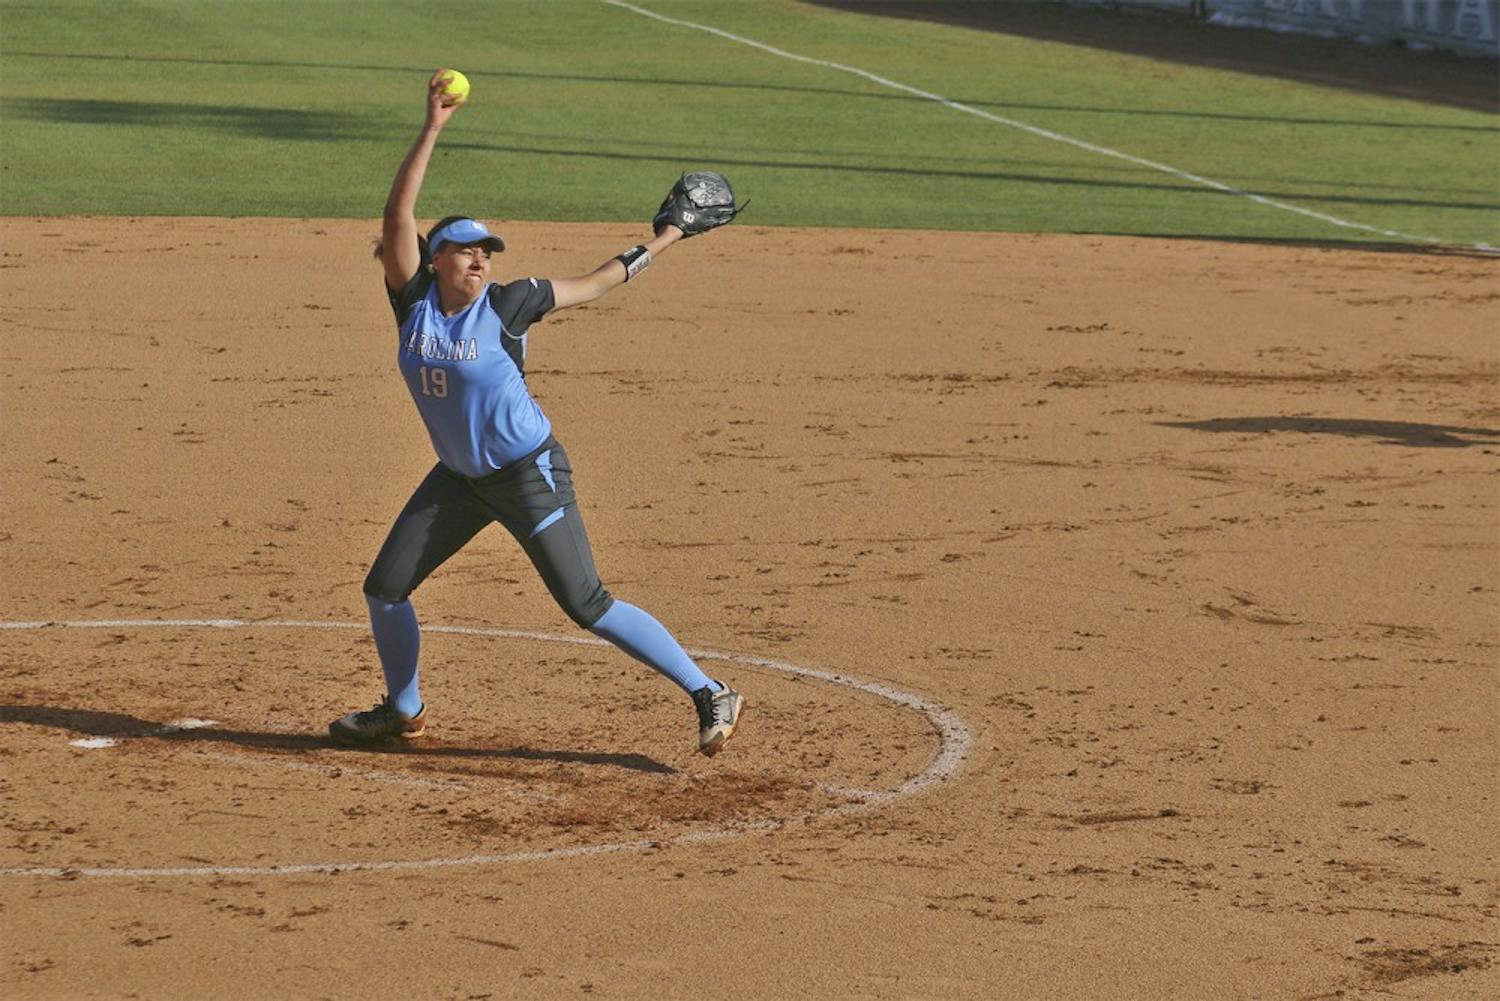 Freshman pitcher Kaylee Carlson pitched a complete game against Virginia Tech in game one of a doubleheader.